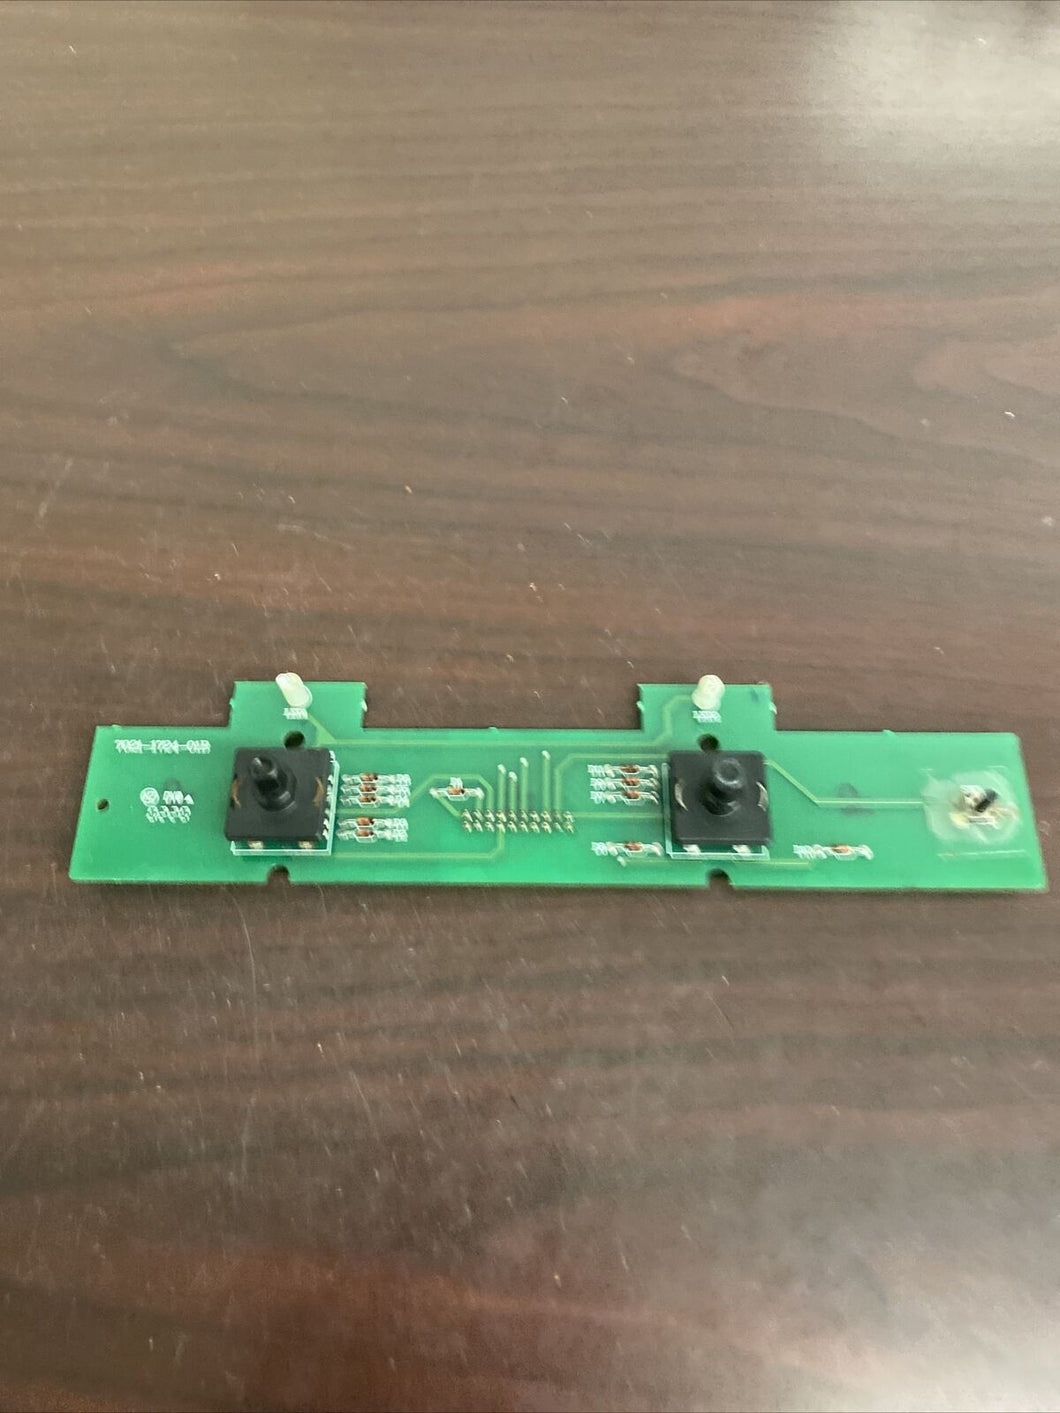 Washer Control Board - Part# 7021-1724-01B | NT398